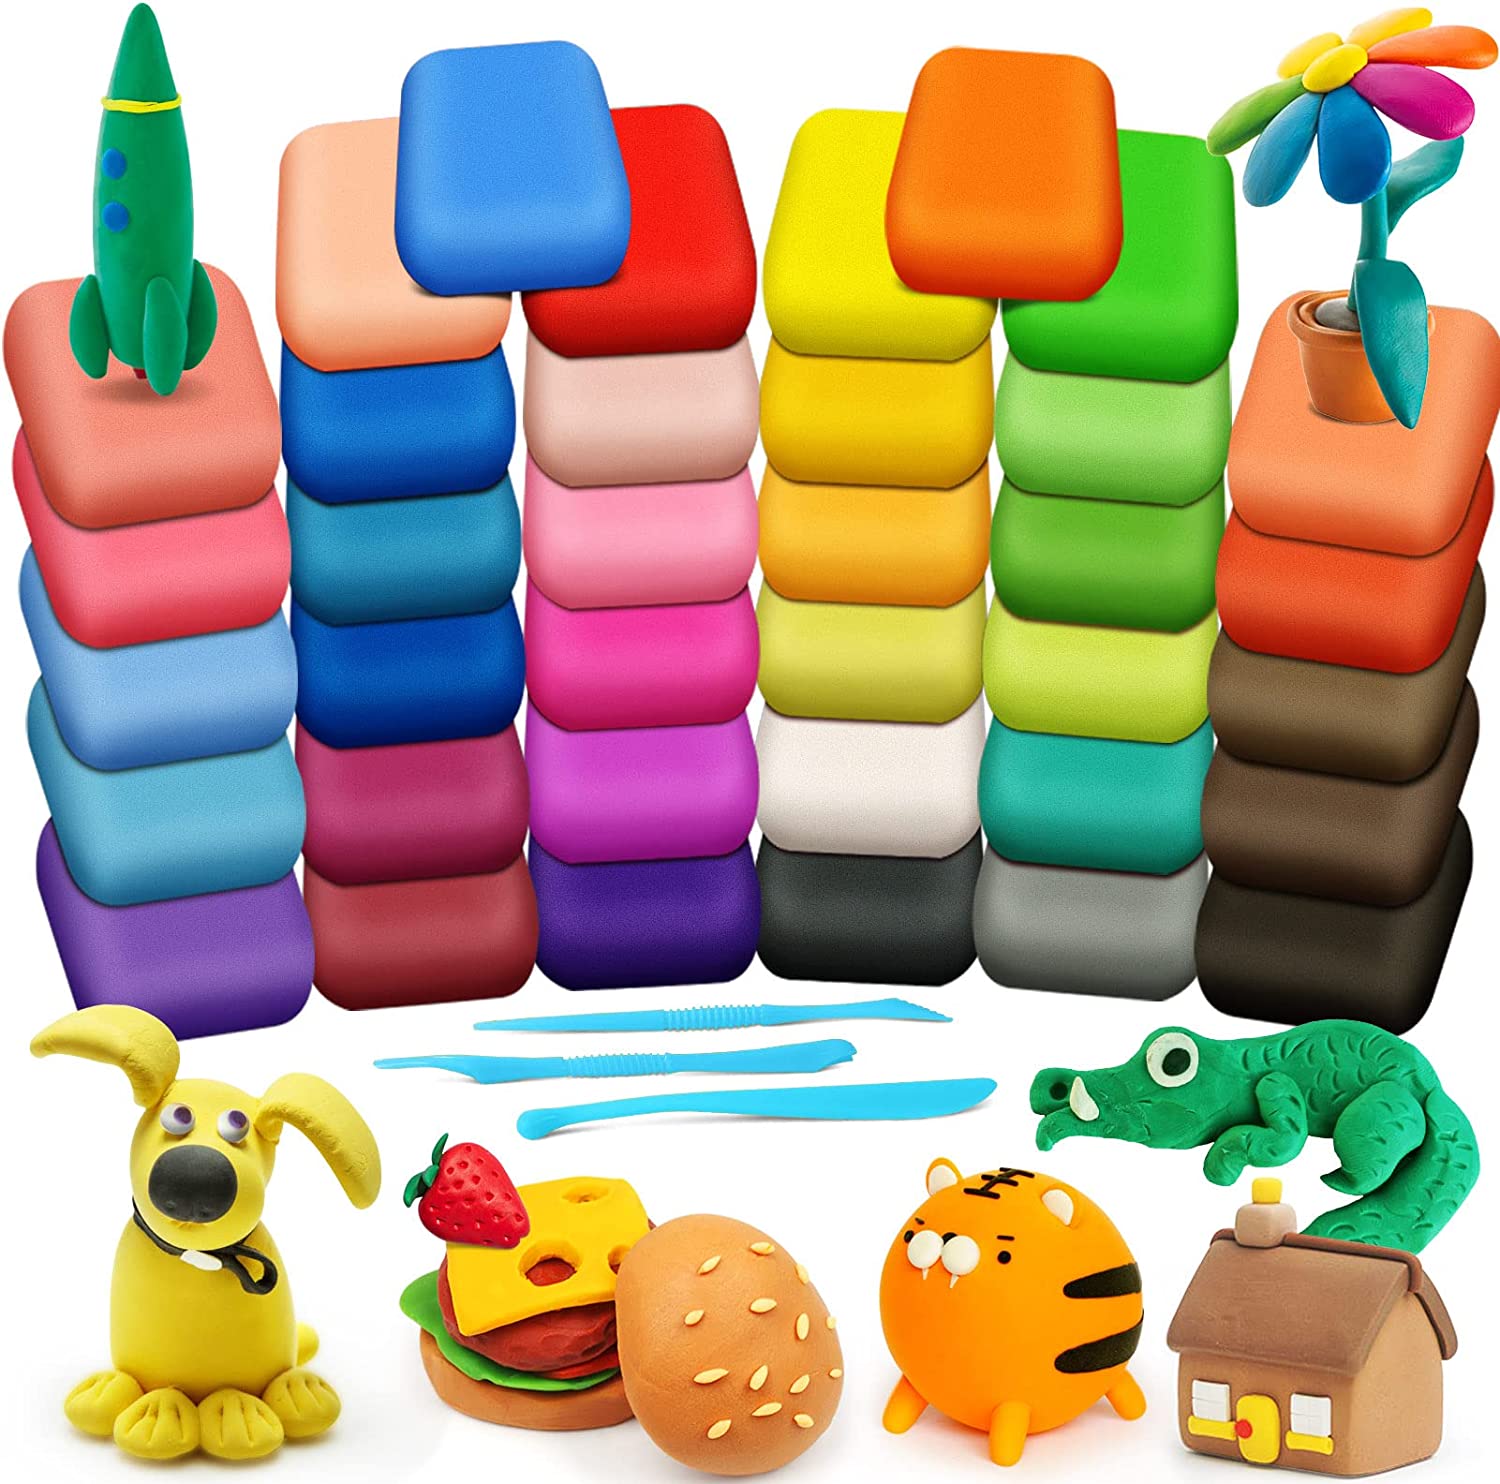 Air Dry Clay 36 Colors- Soft & Ultra Light Modeling Magical Clay for Kids, No Bake Clay with Tools, Adult Unisex